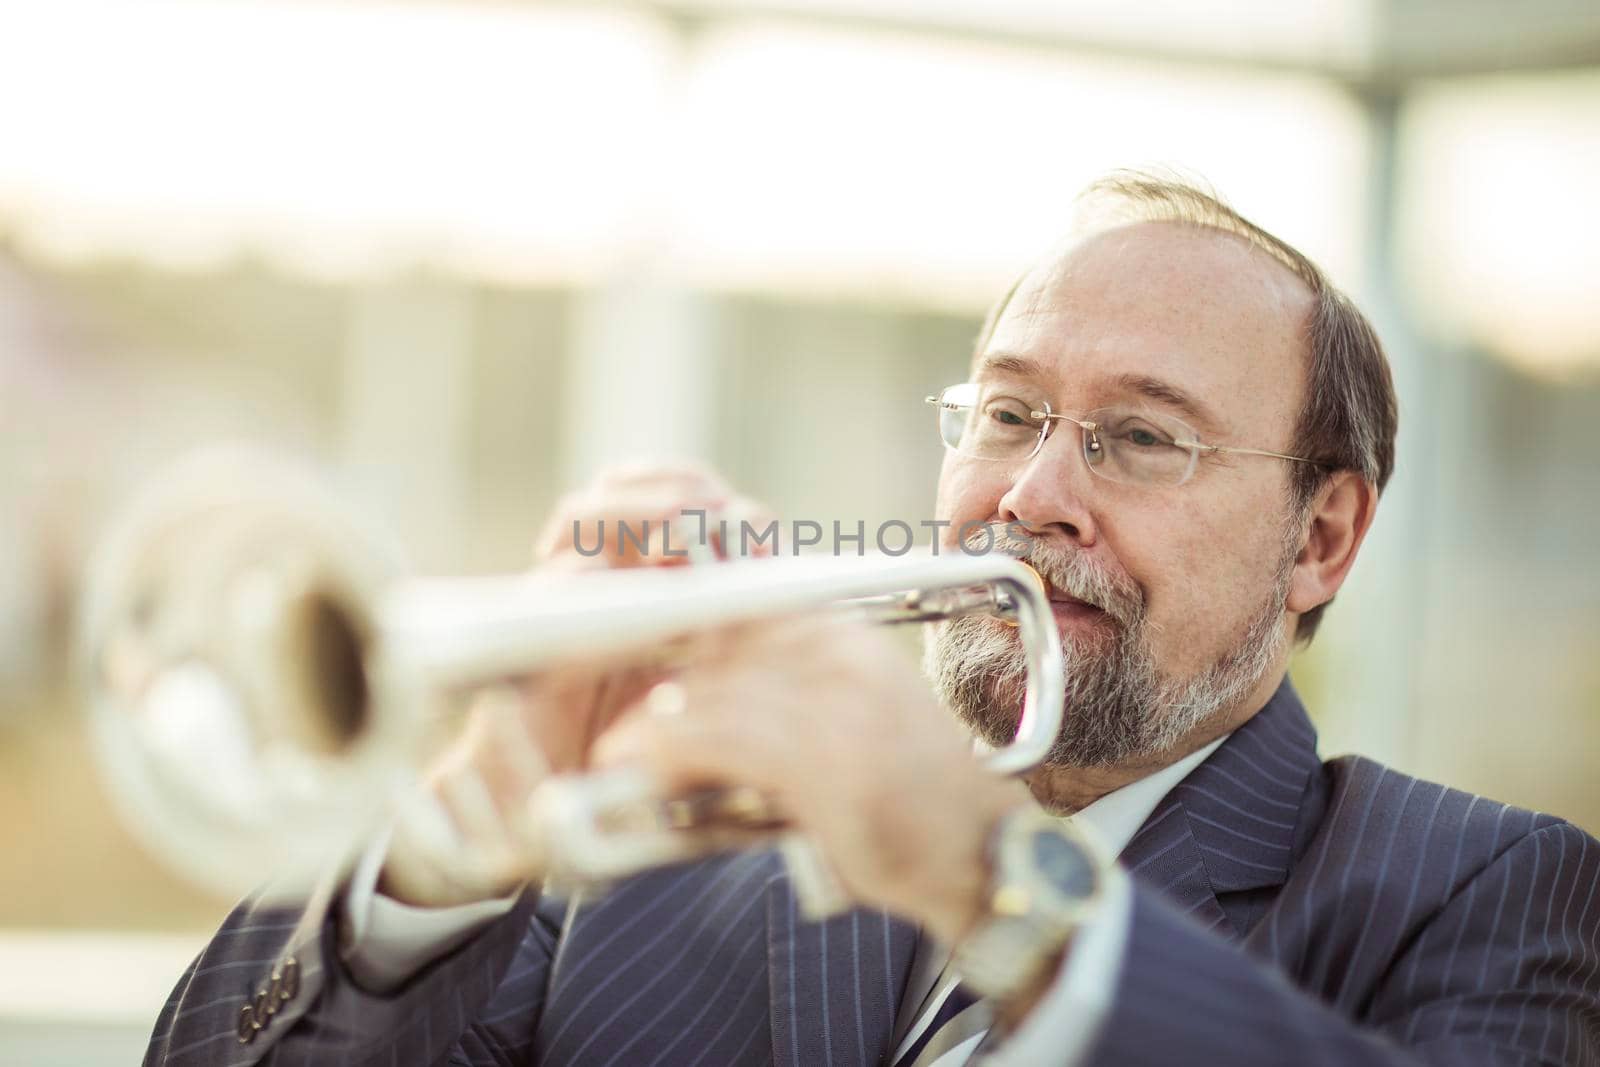 professional musician performs a musical composition on the pipe by SmartPhotoLab